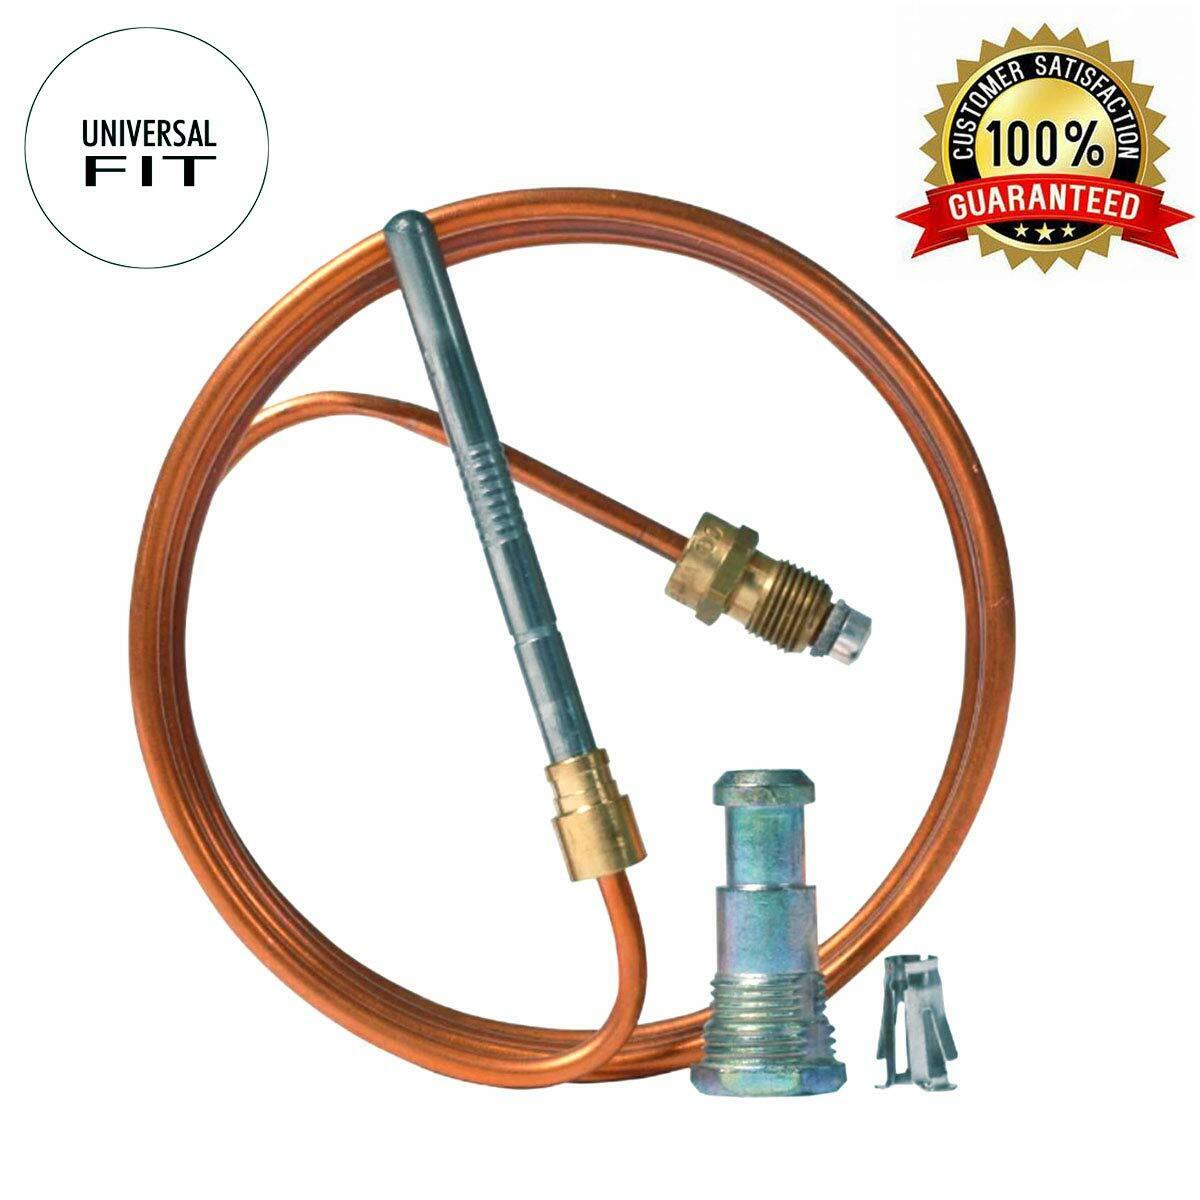 104 Plumbing Plus 36 Inch Thermocouple Universal Use Thermal Coupler Heater